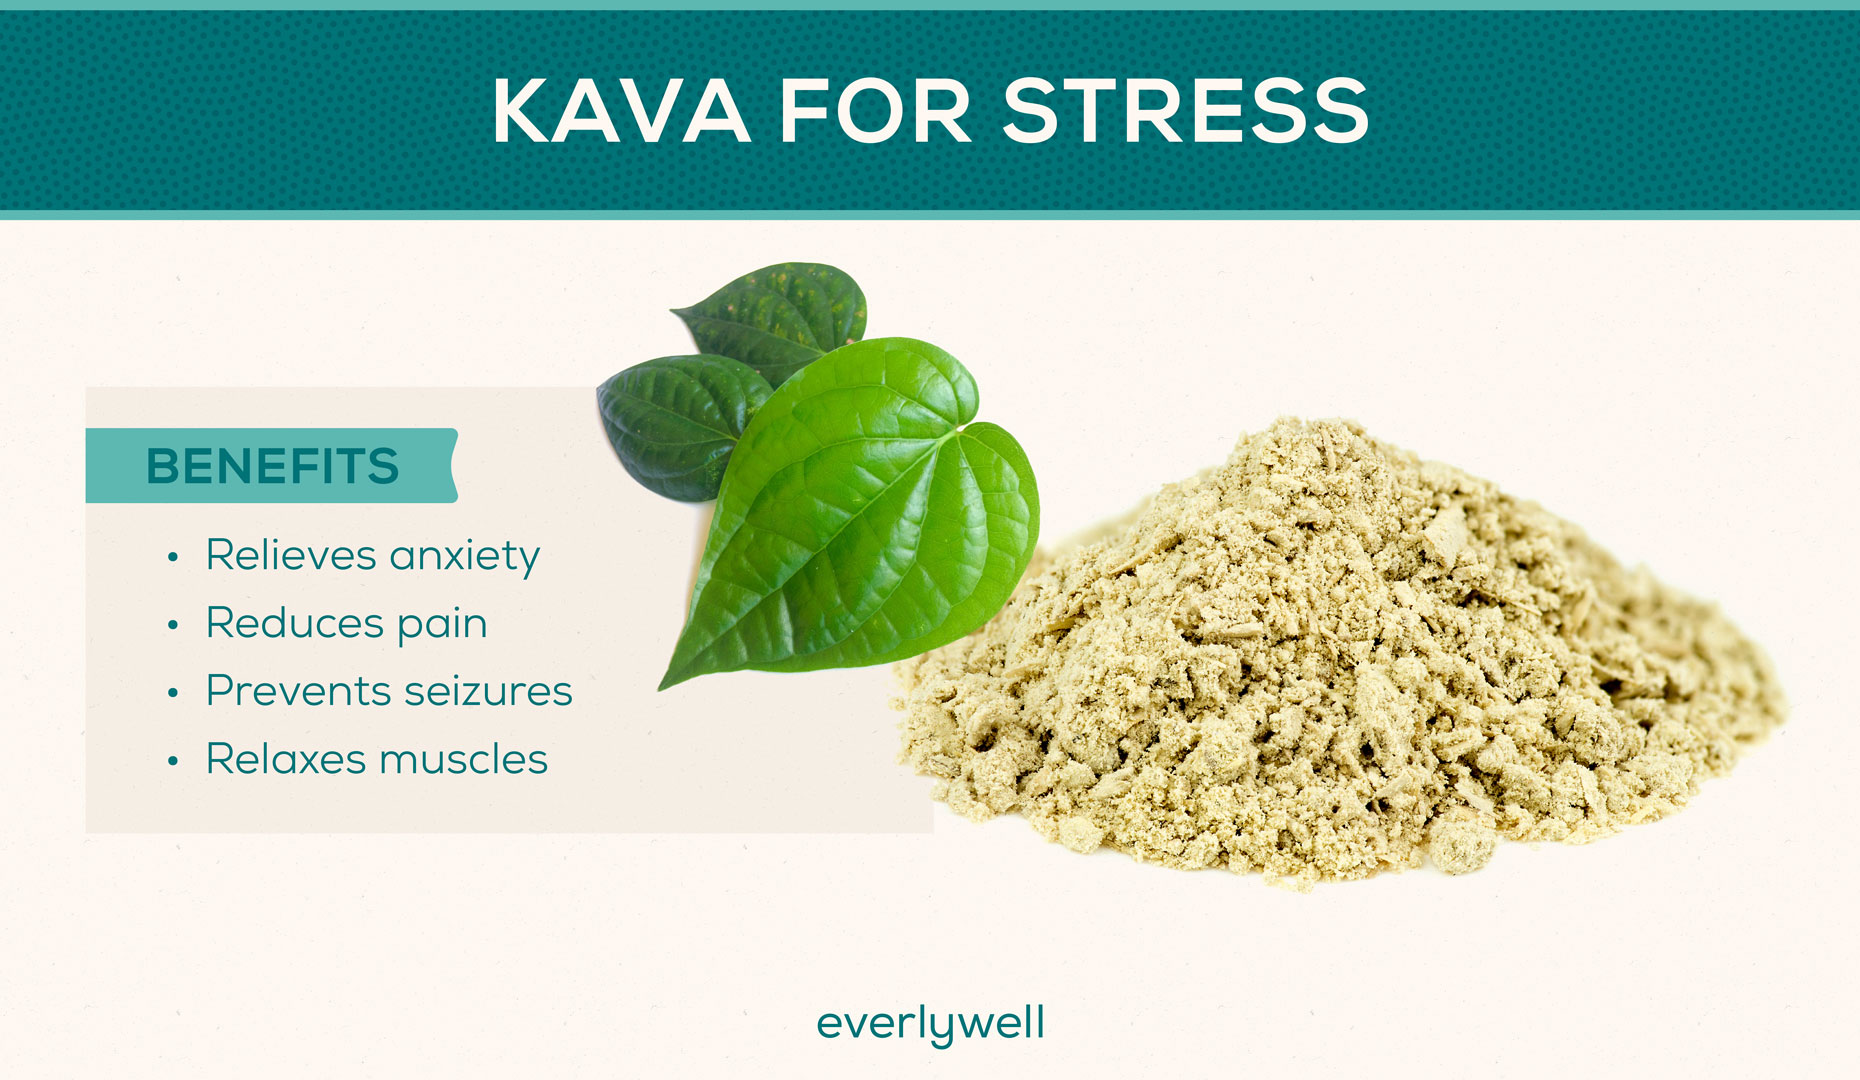 Kava leaves and powder next to list of benefits of kava for stress